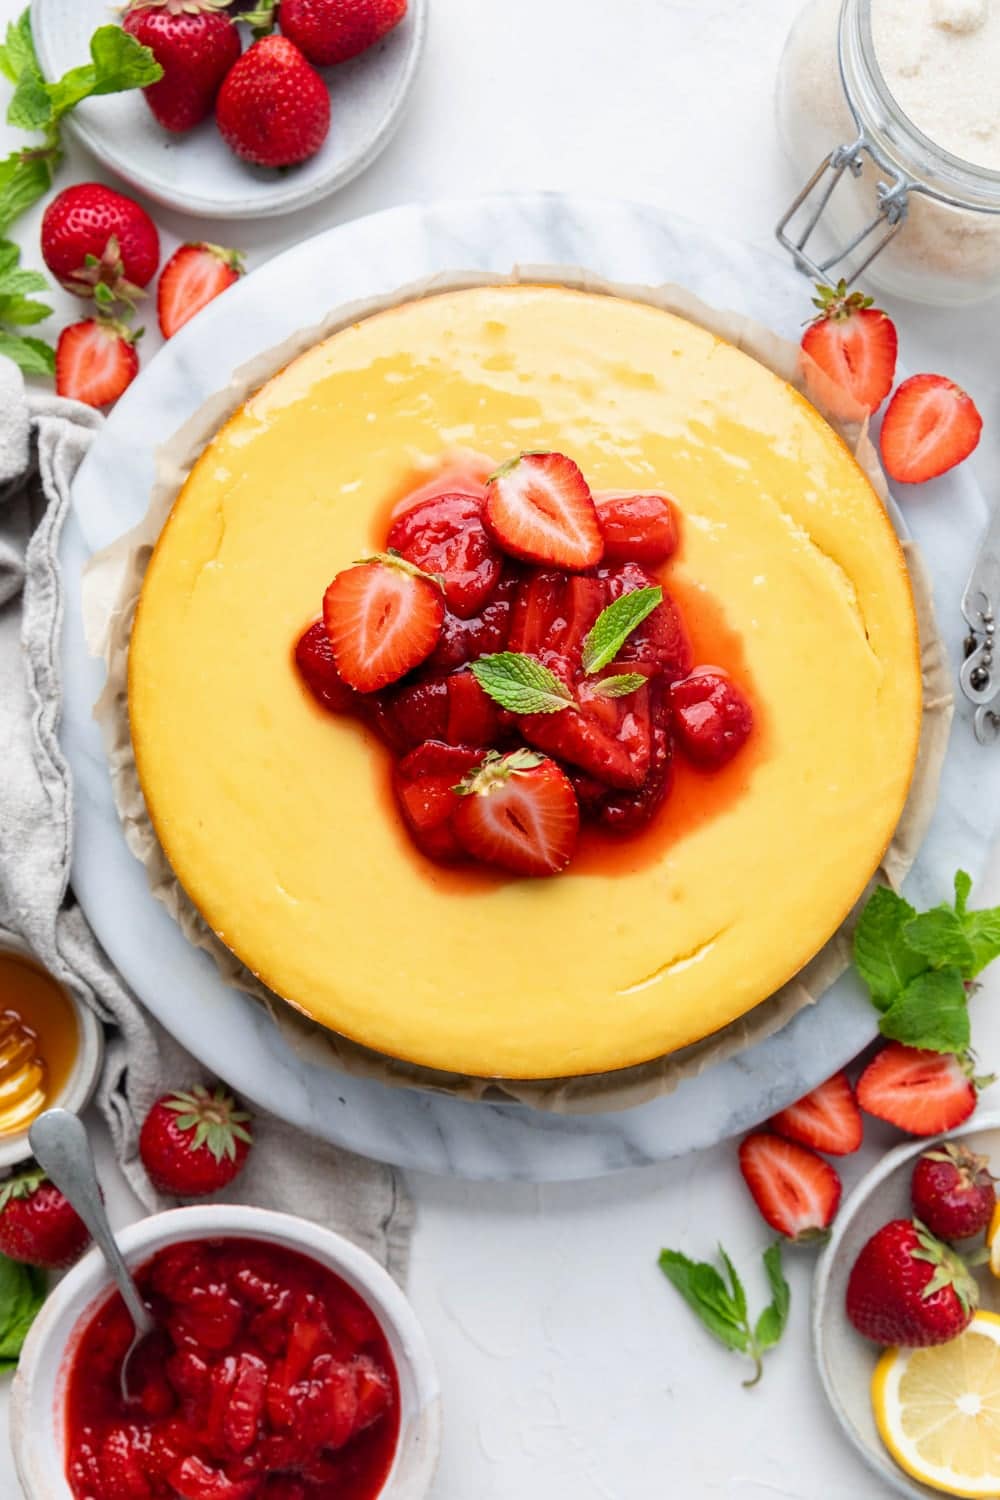 A whole dairy free cheesecake made with dairy free cream cheese decorated with strawberries.